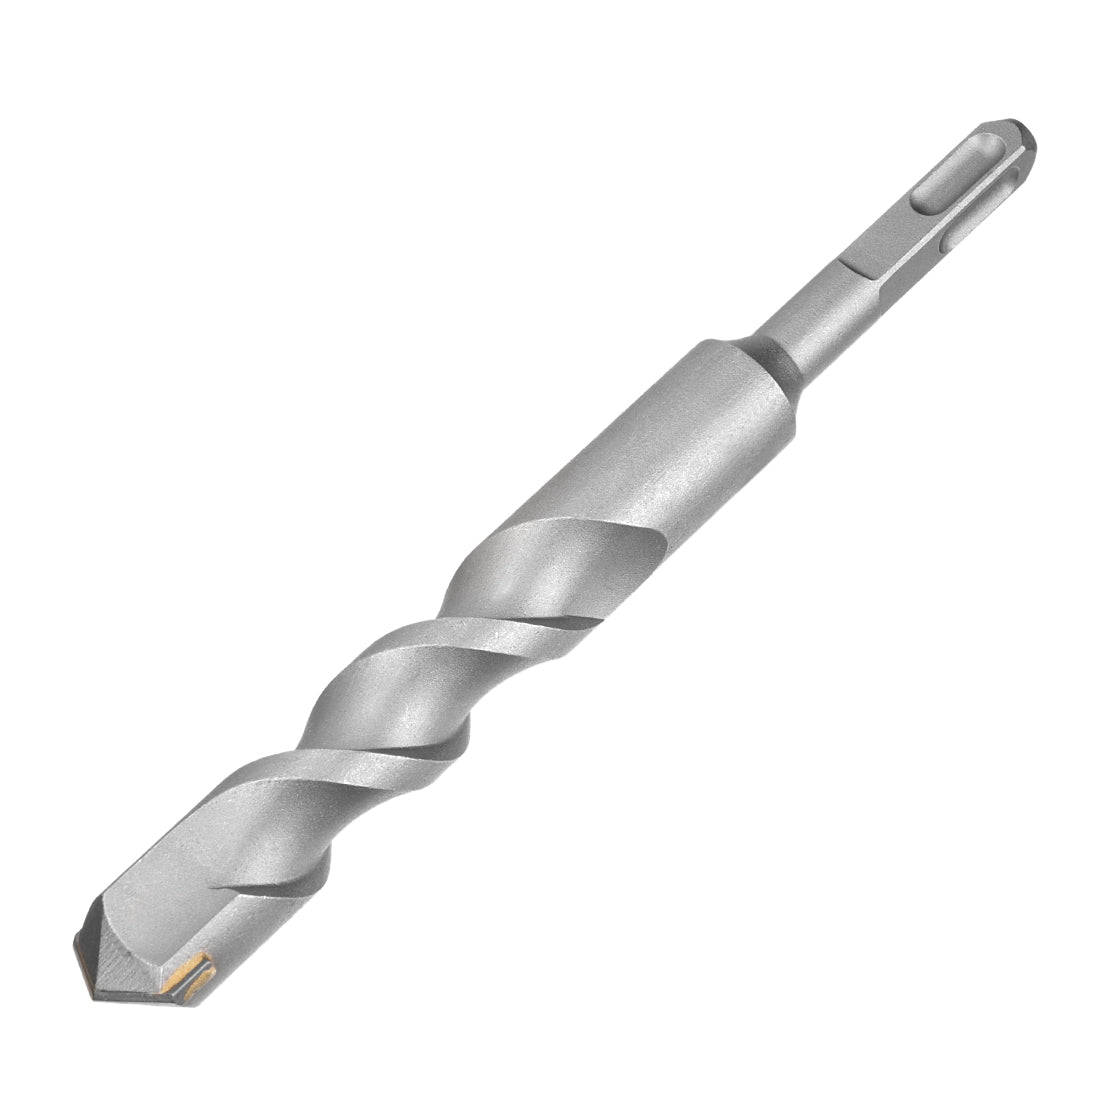 uxcell Uxcell Masonry Drill Bit 25mmx200mm 9mm Square Shank for Impact Drill